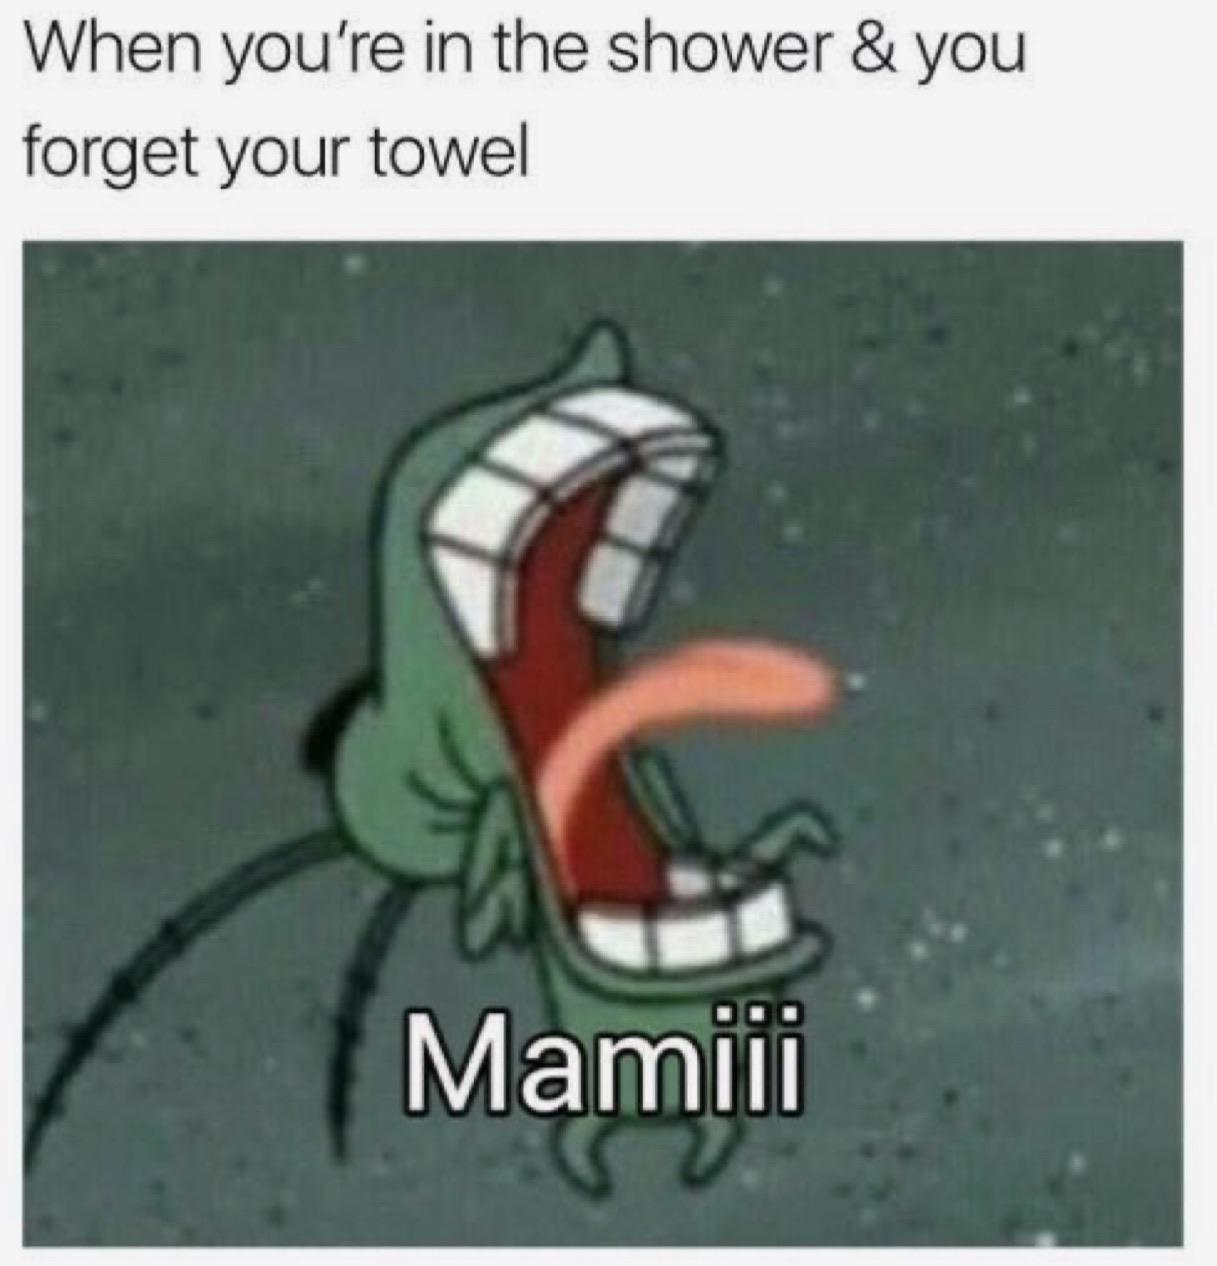 Spongebob, Thank Spongebob Memes Spongebob, Thank text: When you're in the shower & you forget your towel Mamiii 